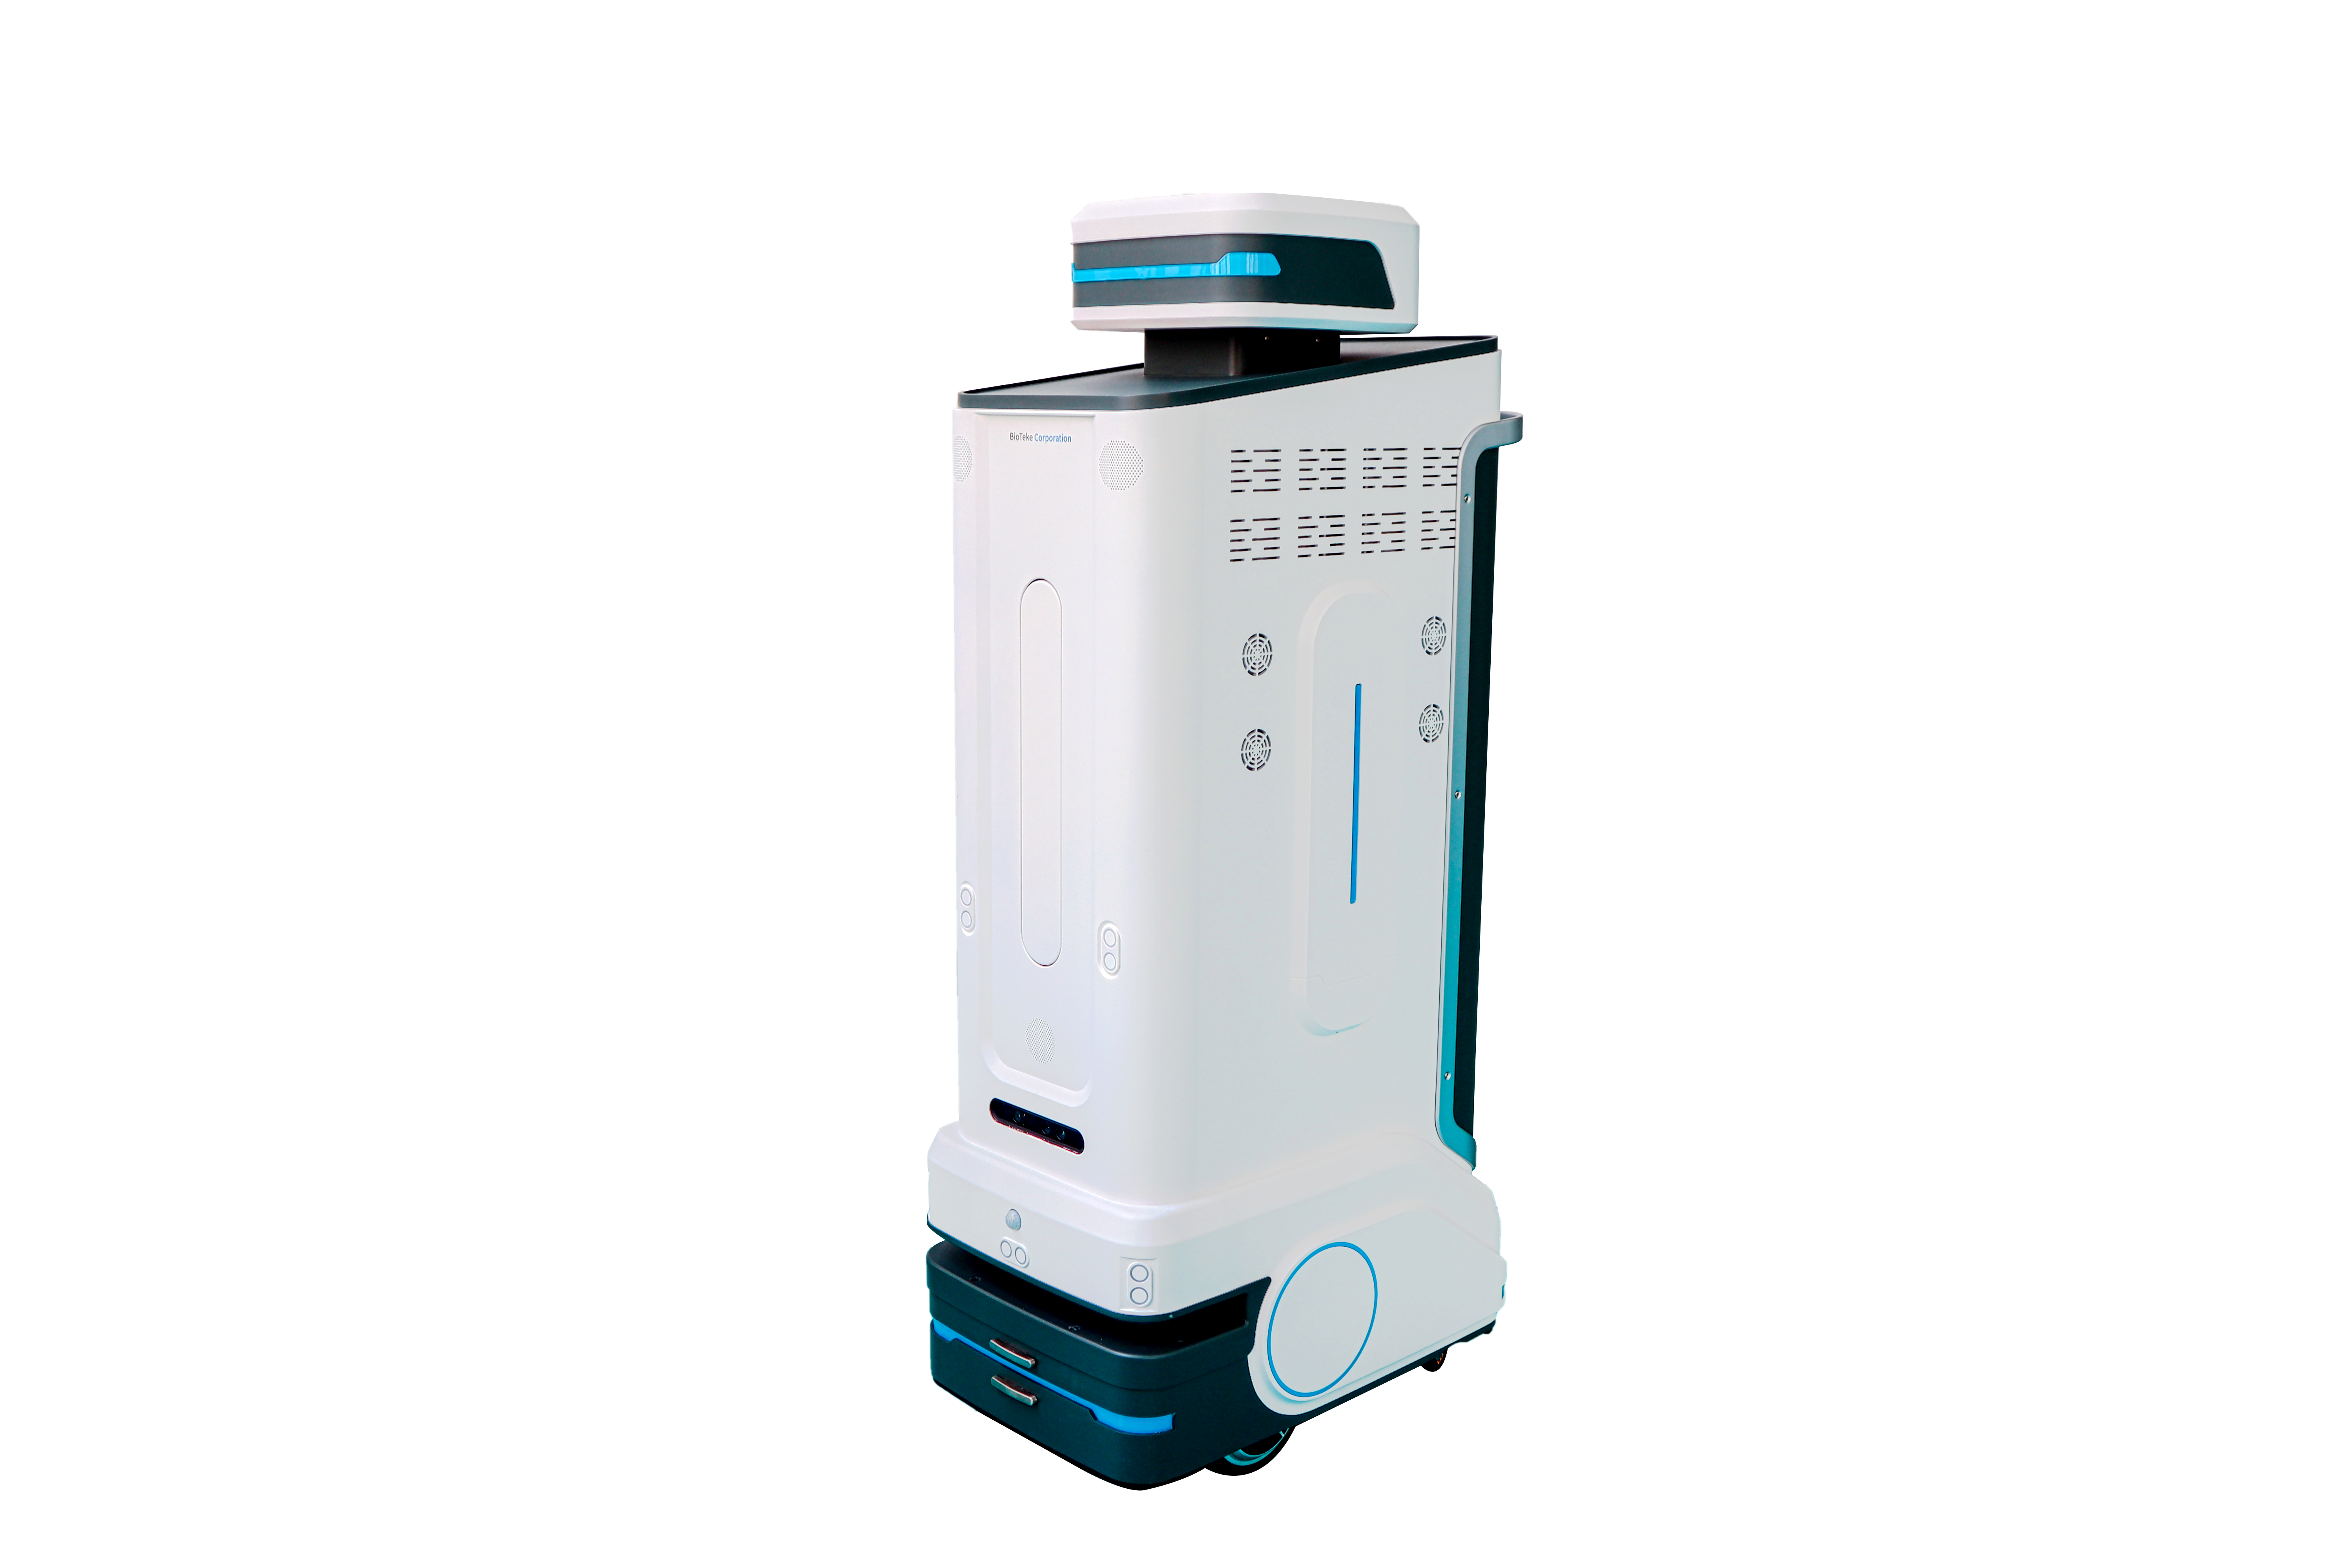 Why choose a disinfection robot?